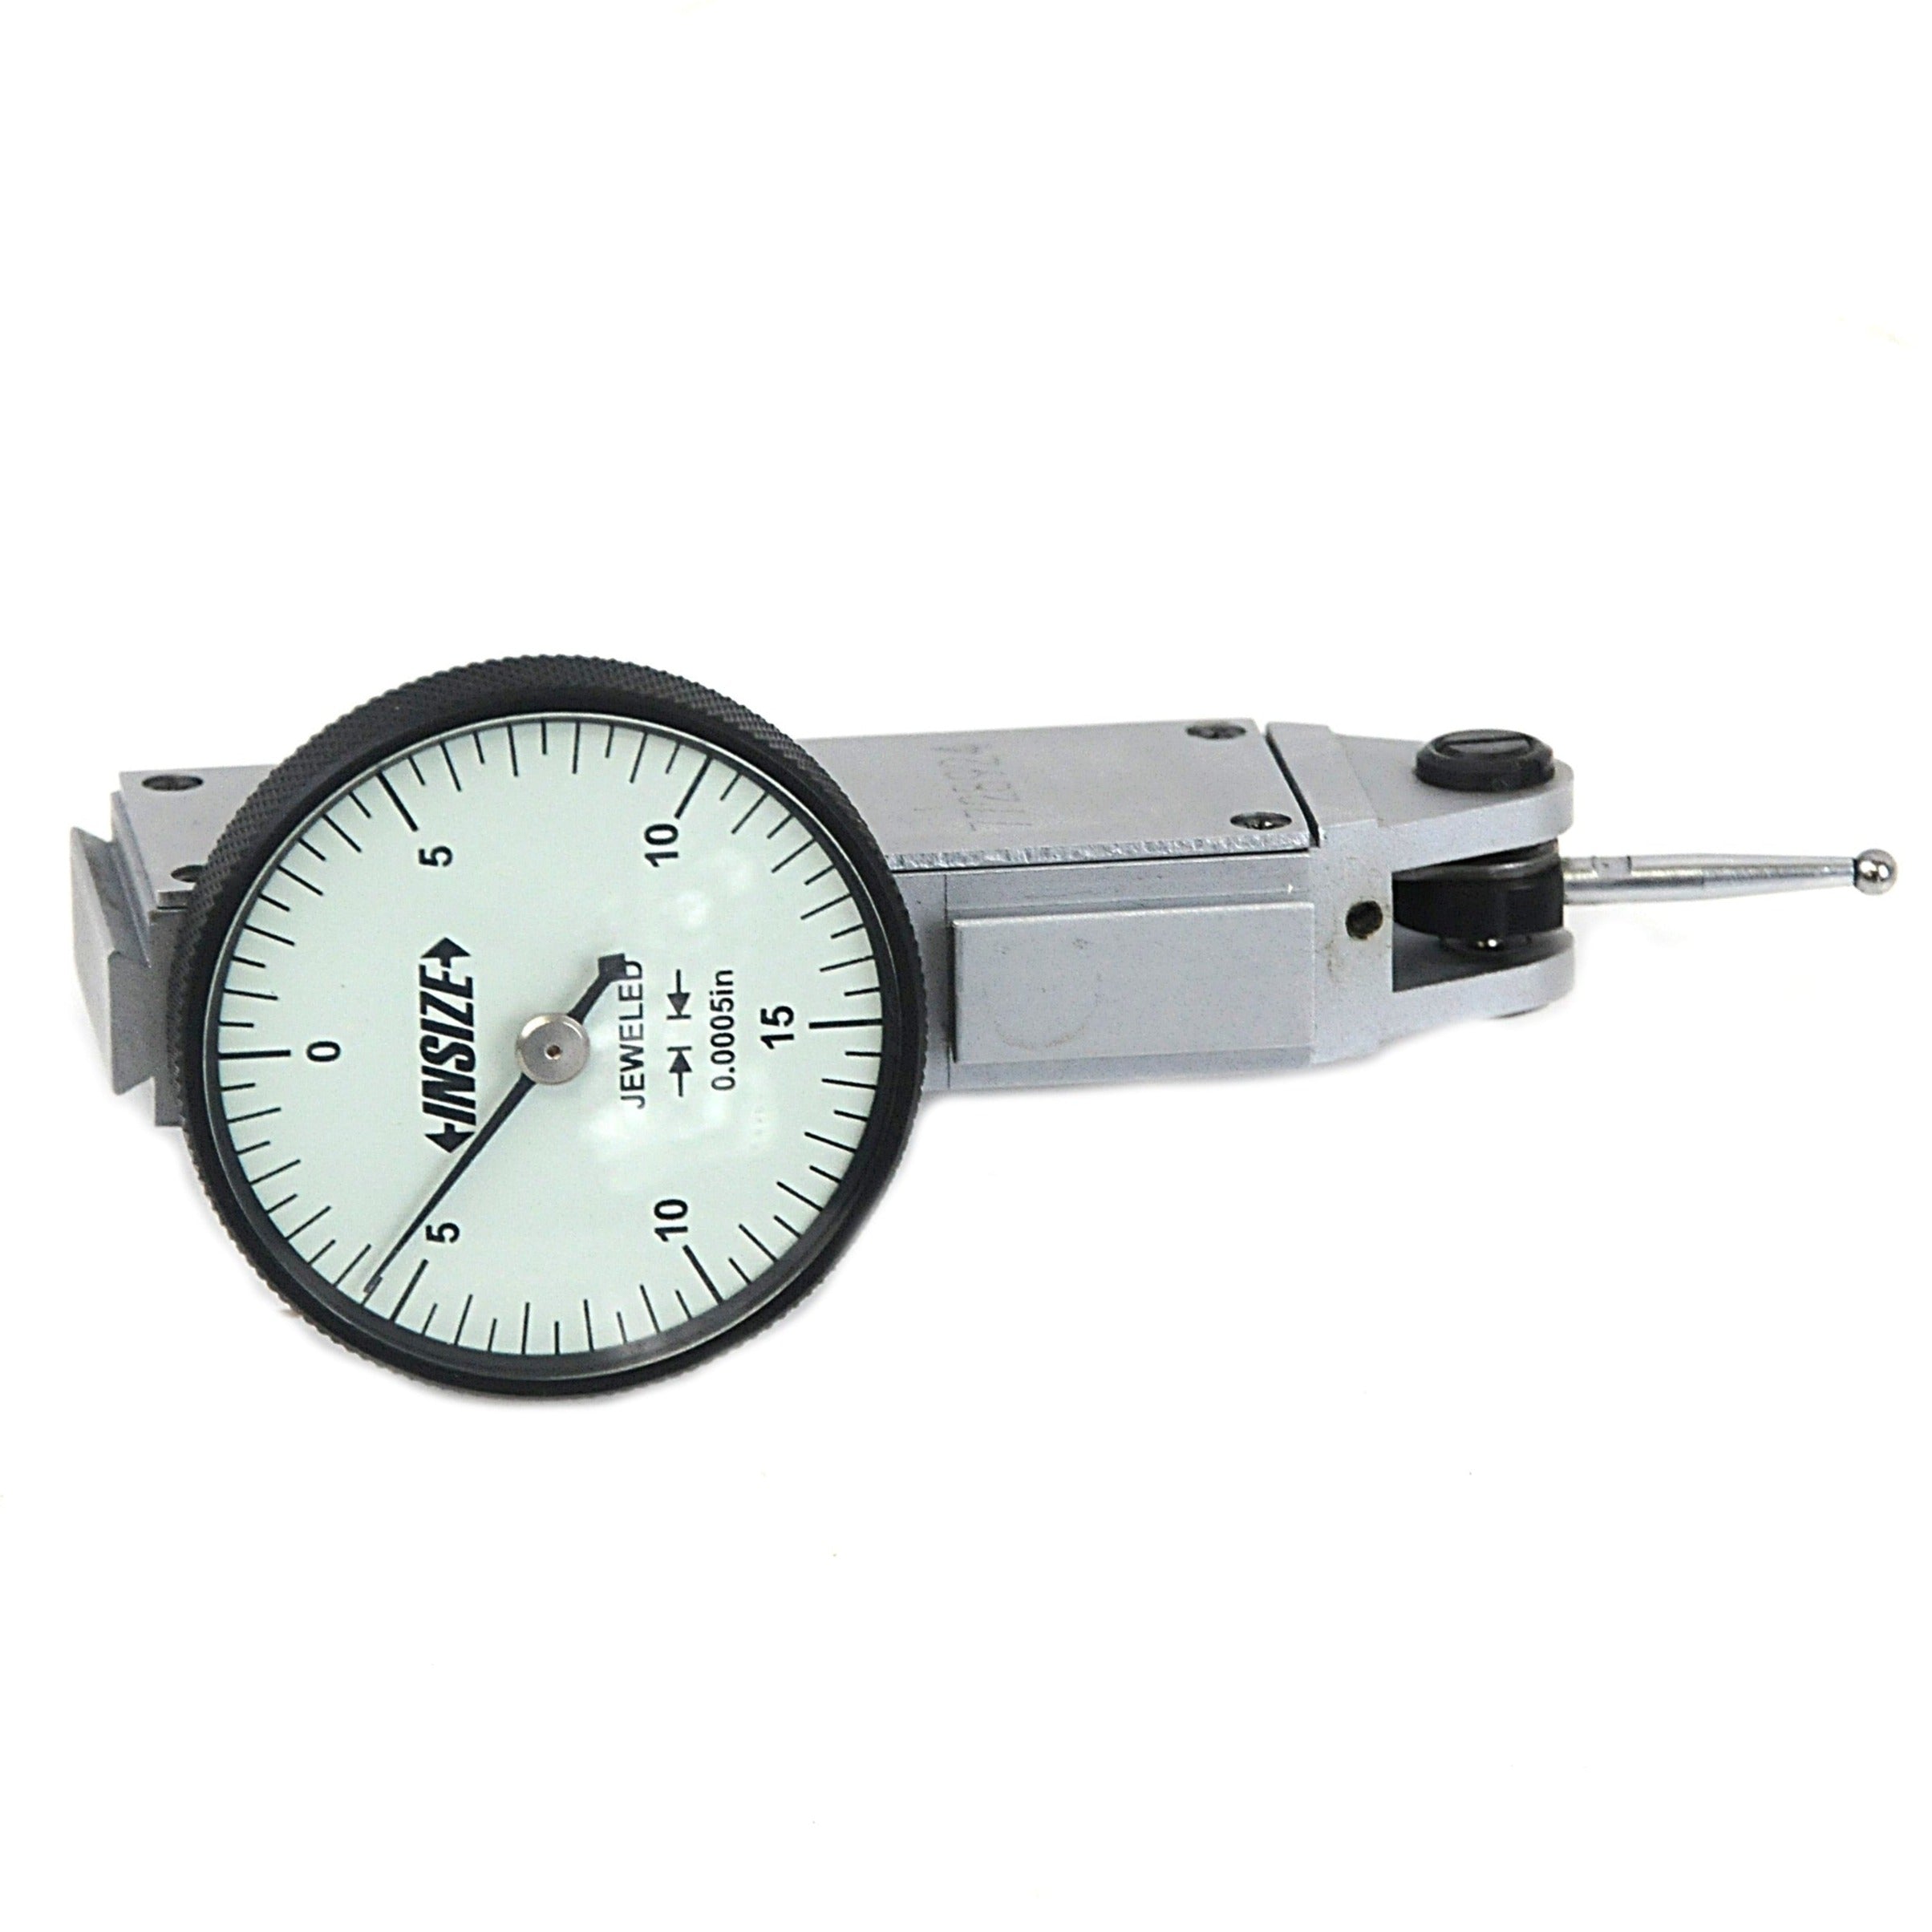 Insize Imperial Dial Indicator 0.03" x 0.0005" Range Series 2380-35